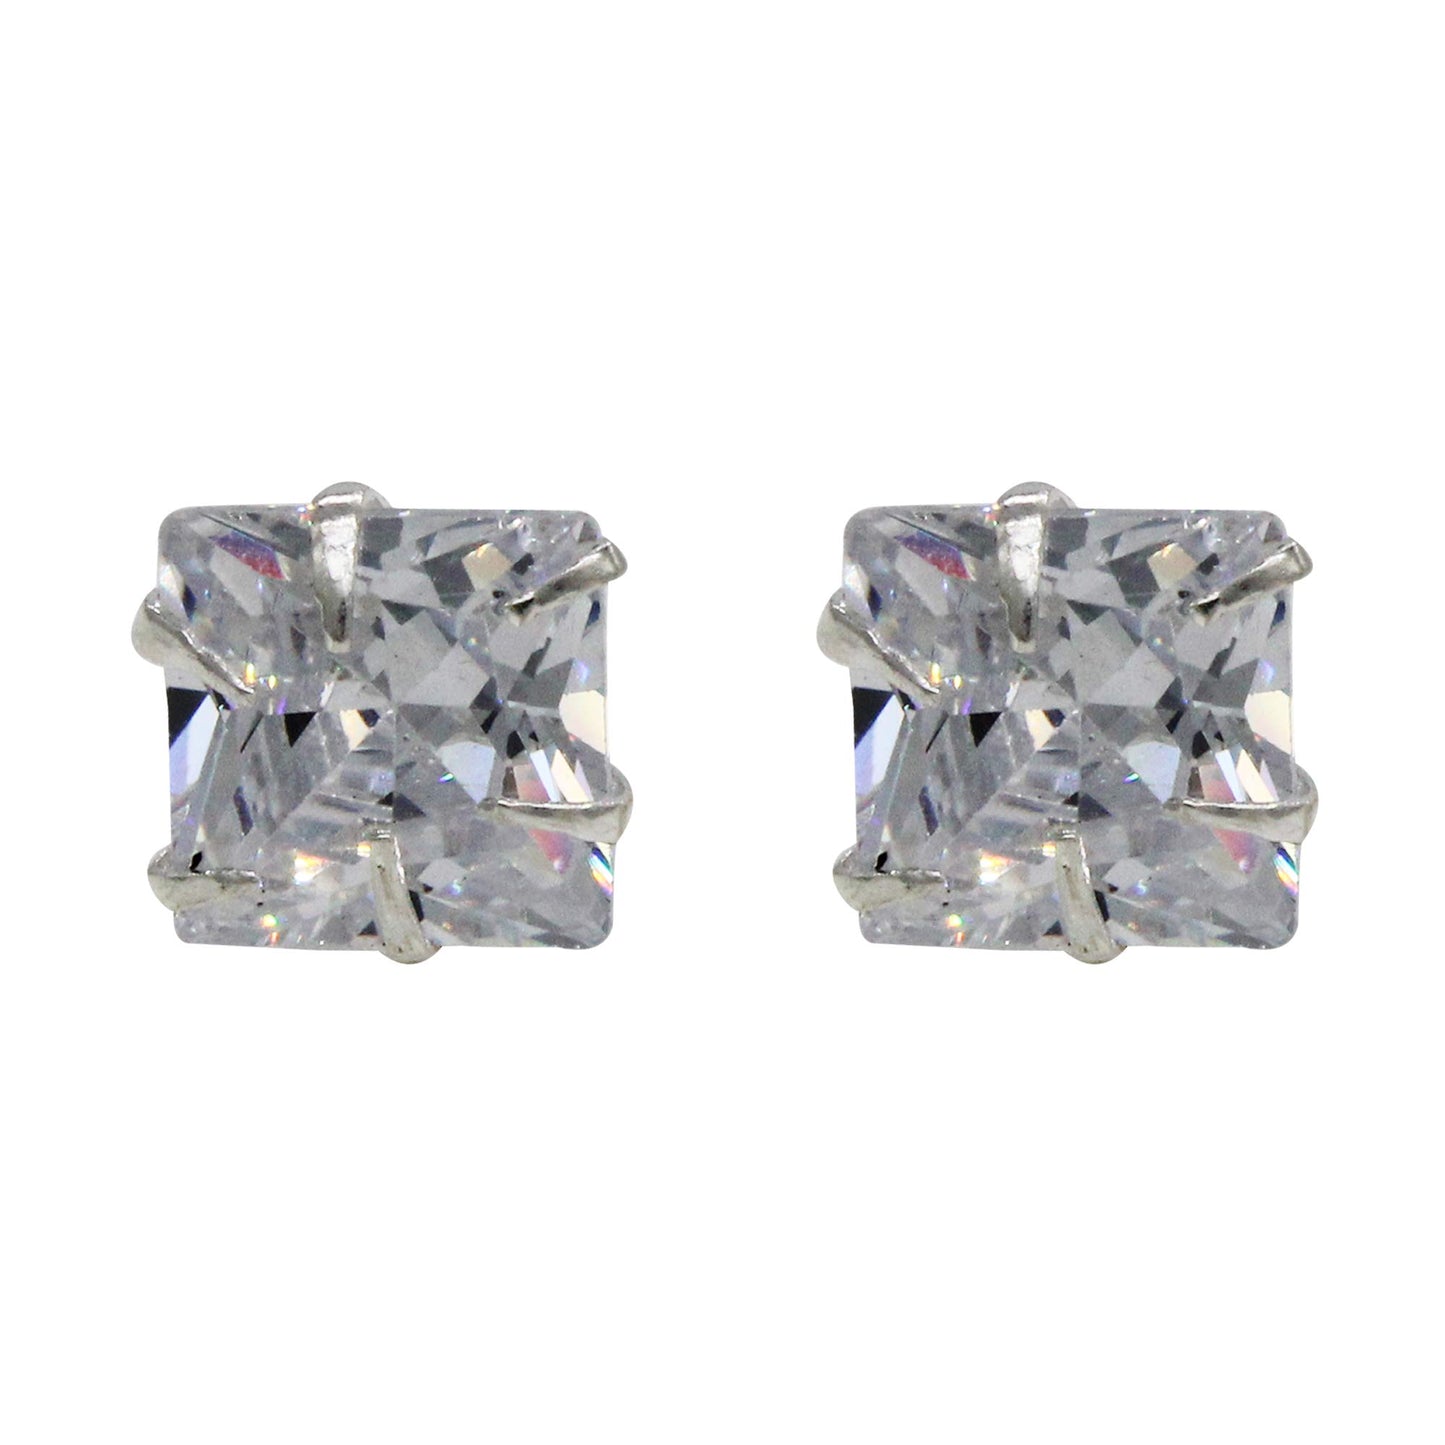 Shubham Jewellers Rehti 925-92.5 Sterling Silver Princess Cut Real Cubic Zirconia Fashion Stud Earrings For Men,Women,Children,Boys and Girls 5 MM